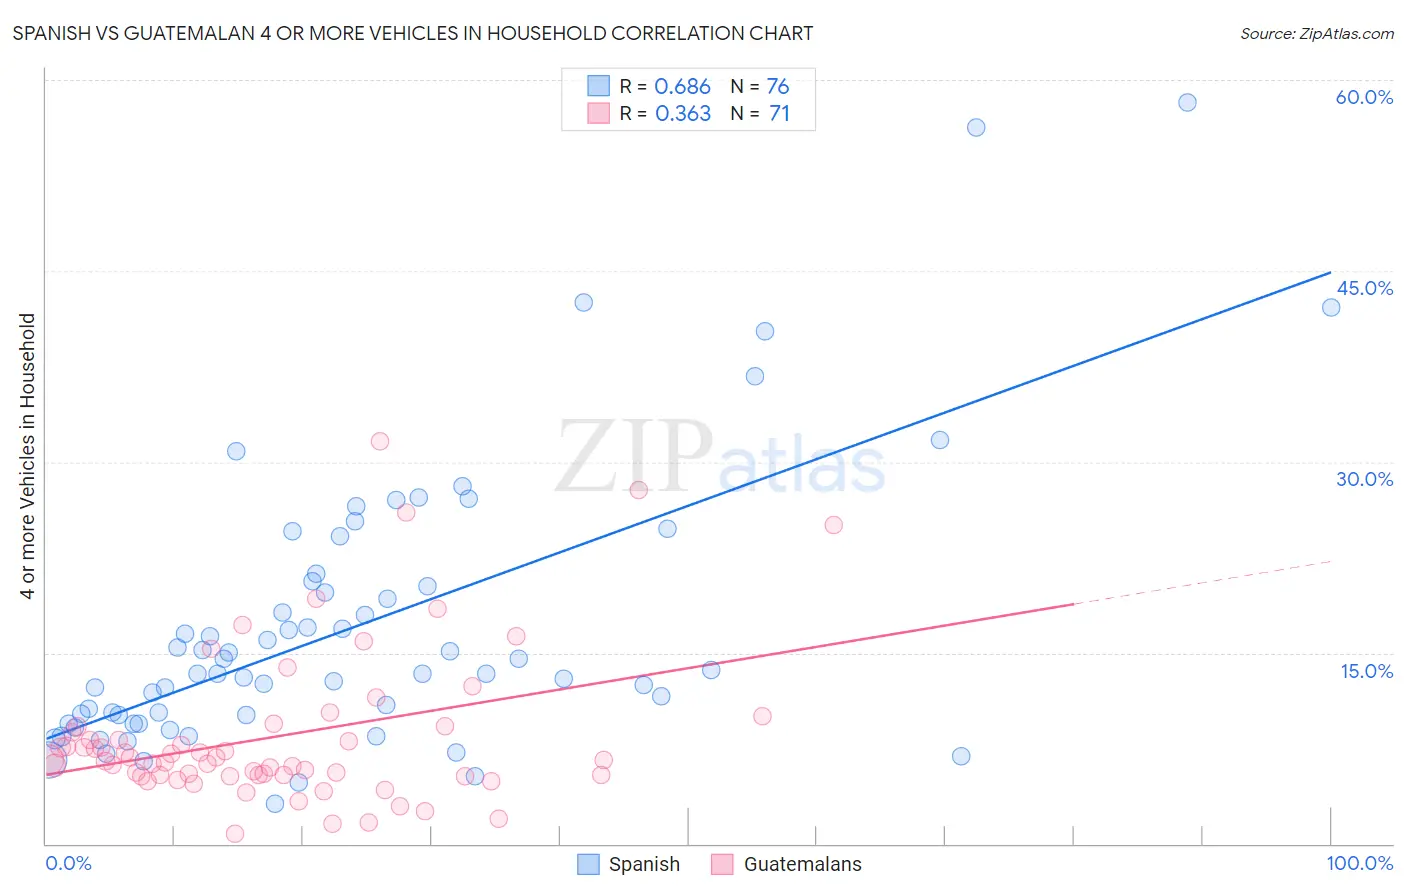 Spanish vs Guatemalan 4 or more Vehicles in Household